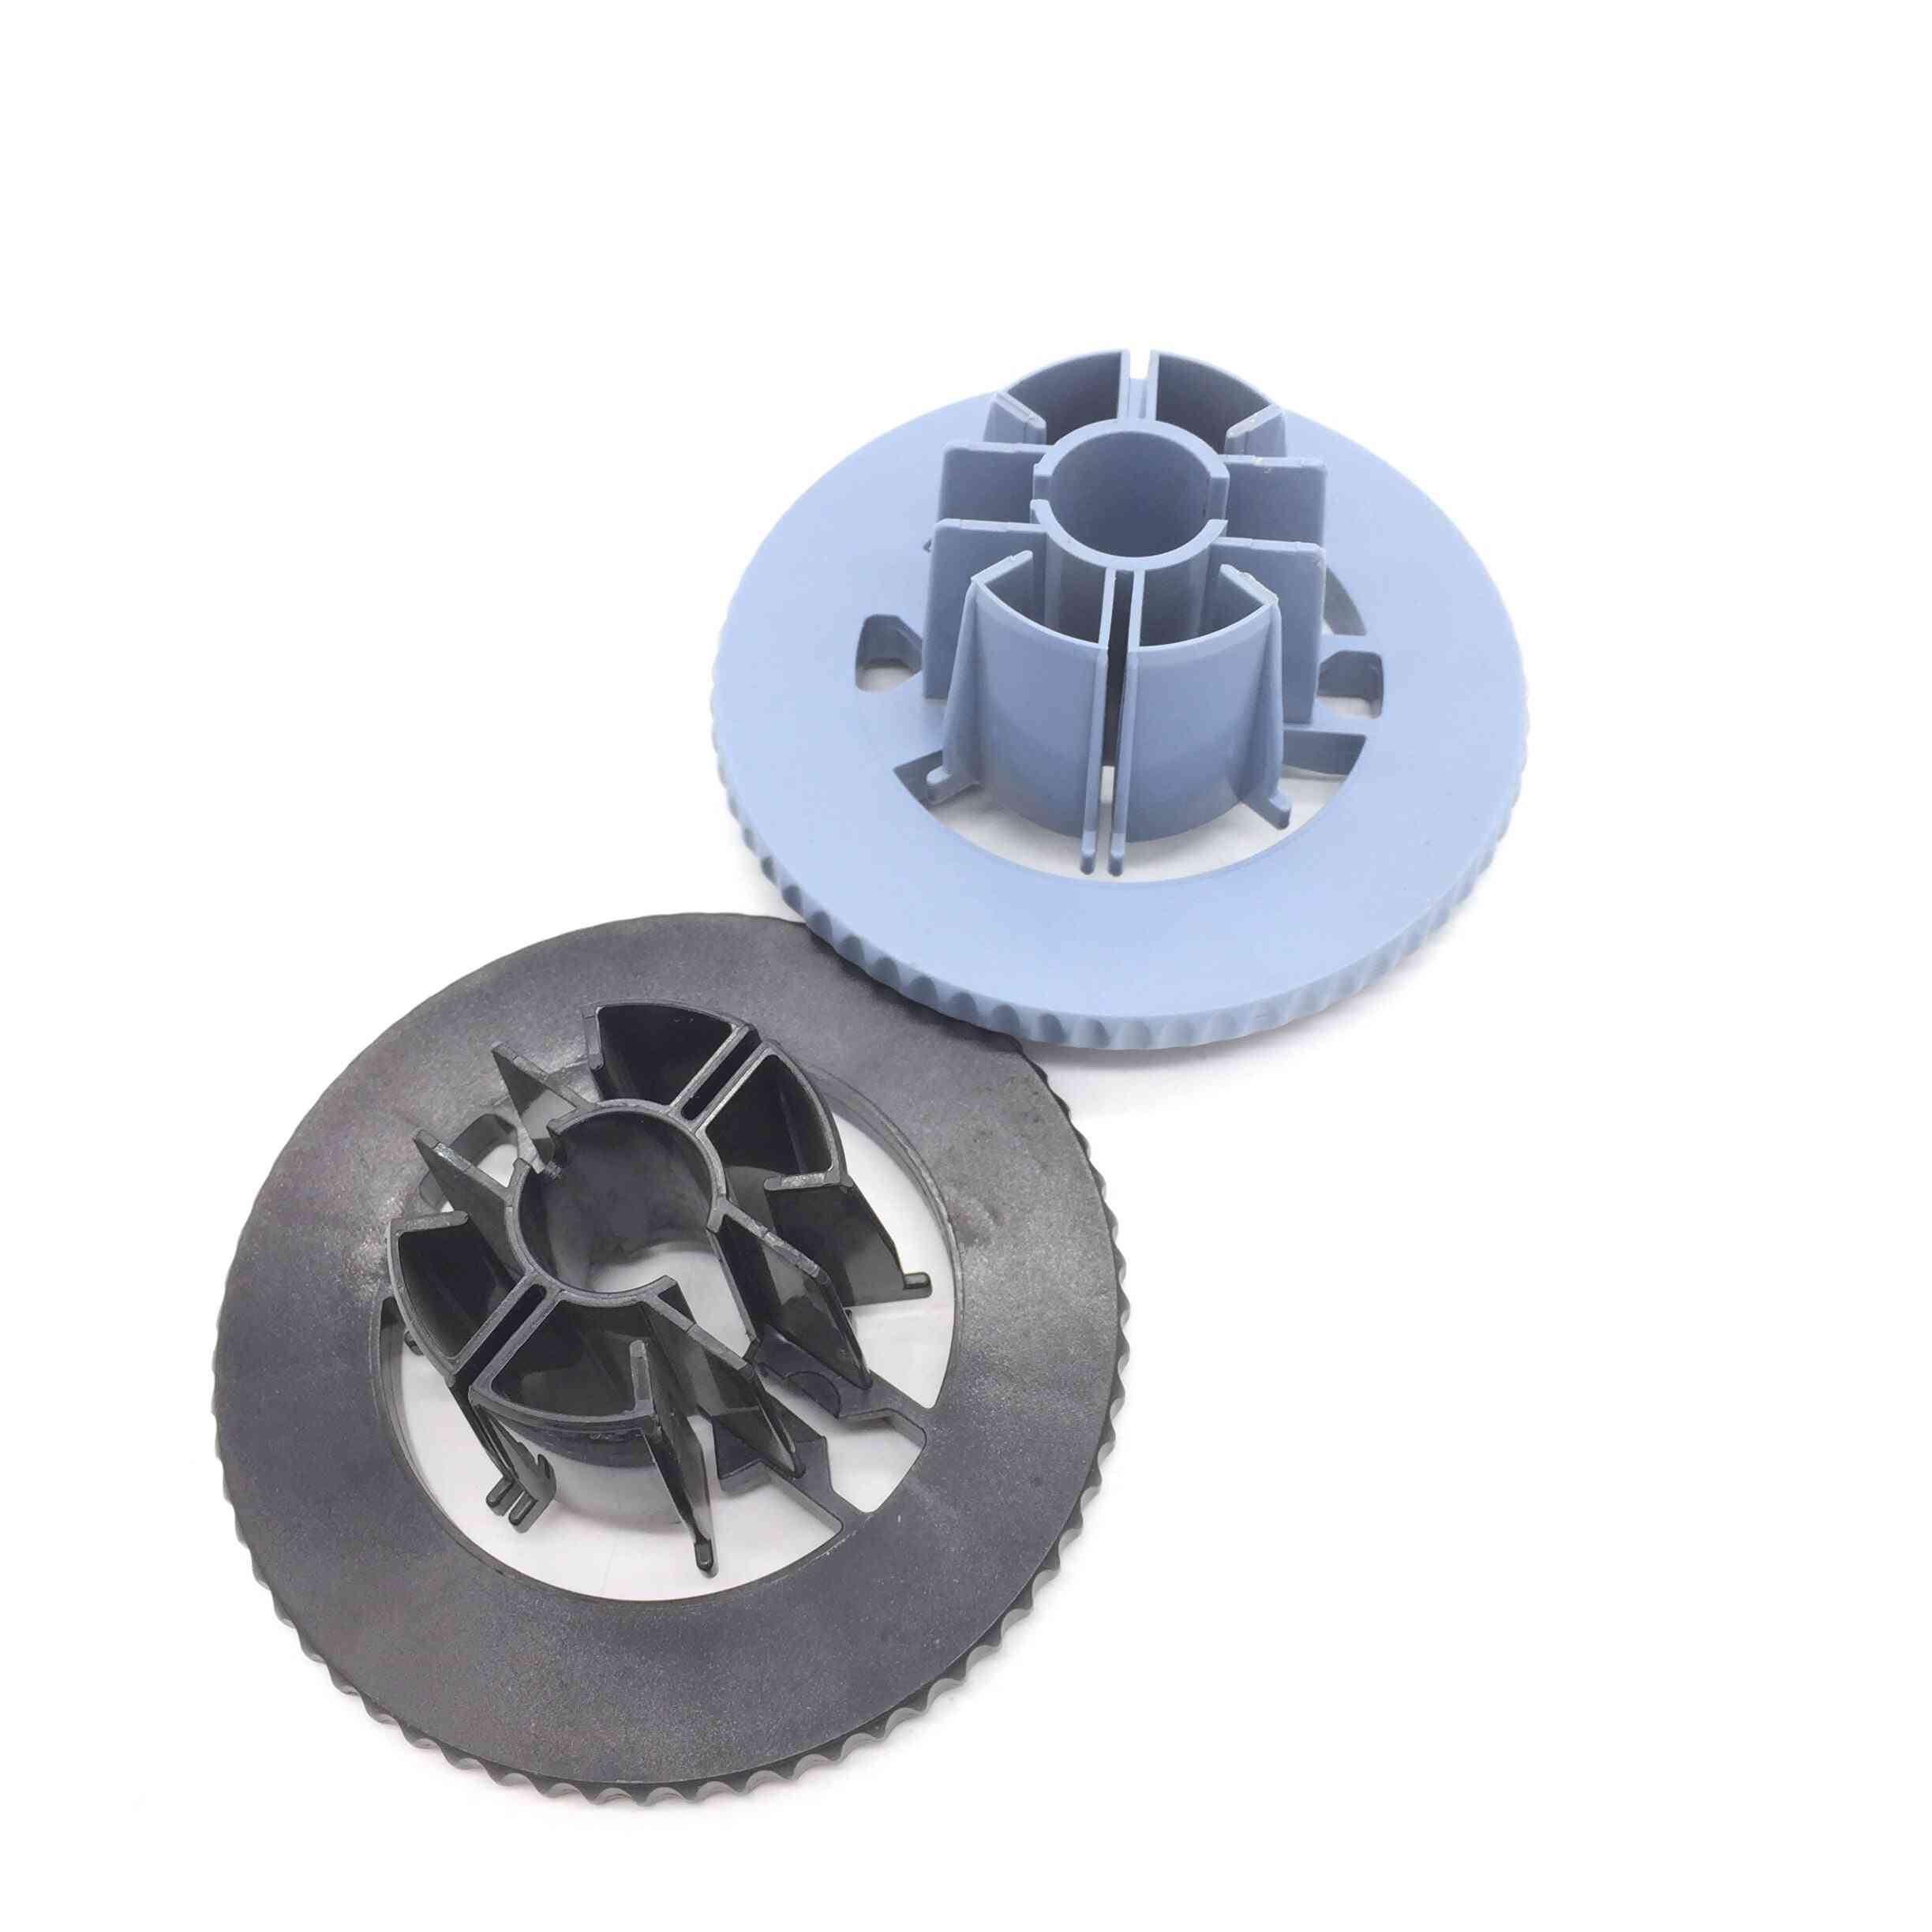 Rollfeed Spindle For Hp Designjet 500 510 800